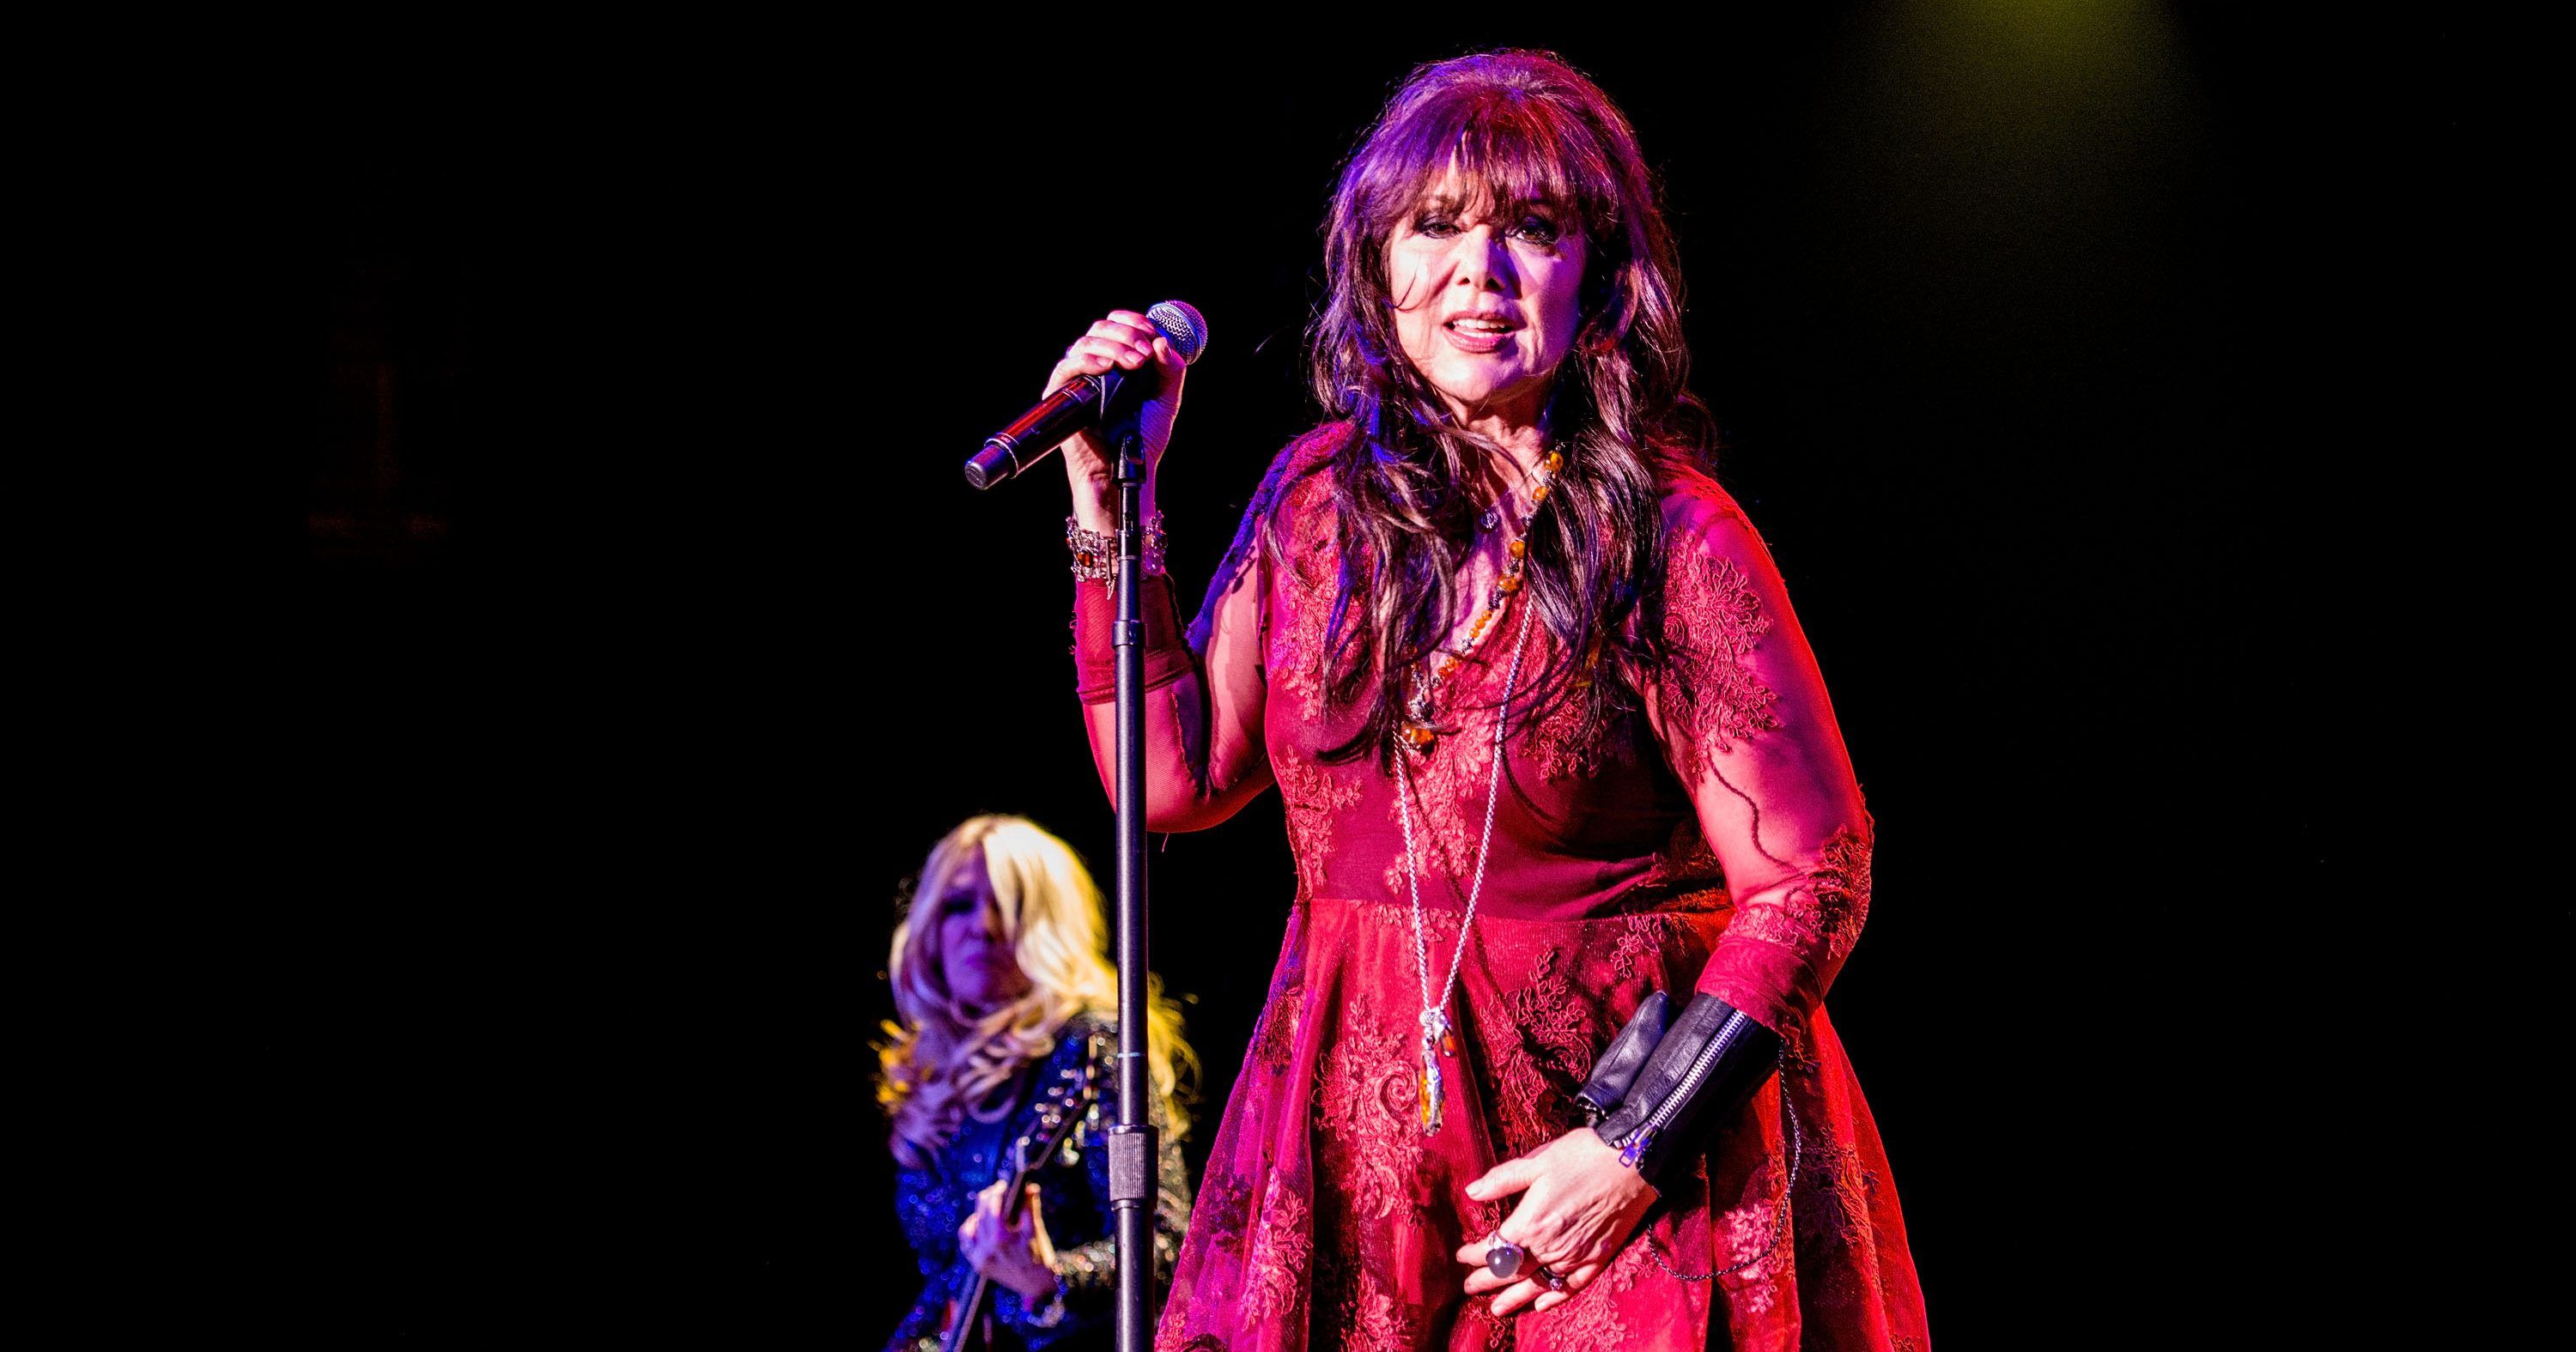 INGLEWOOD, CA - AUGUST 23: Nancy and Ann Wilson of Heart perform at The Forum on August 23, 2016 in Inglewood, California. (Photo by Timothy Norris/Getty Images)